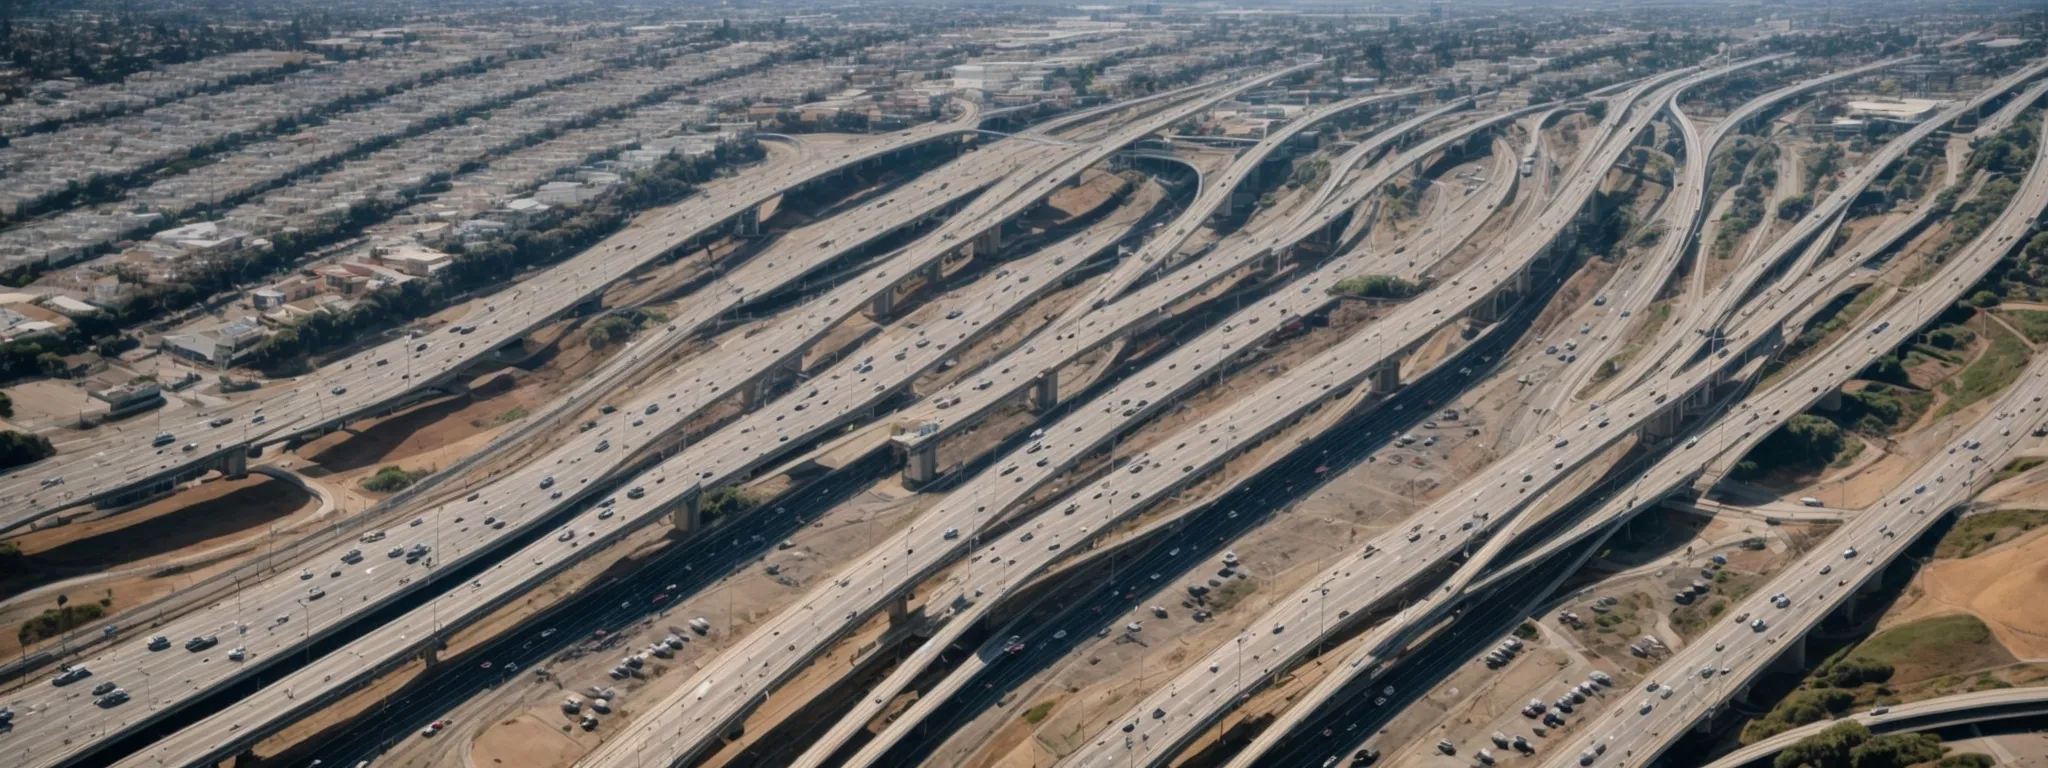 a wide aerial view of san diego's crowded highways intertwining beneath the clear blue sky.